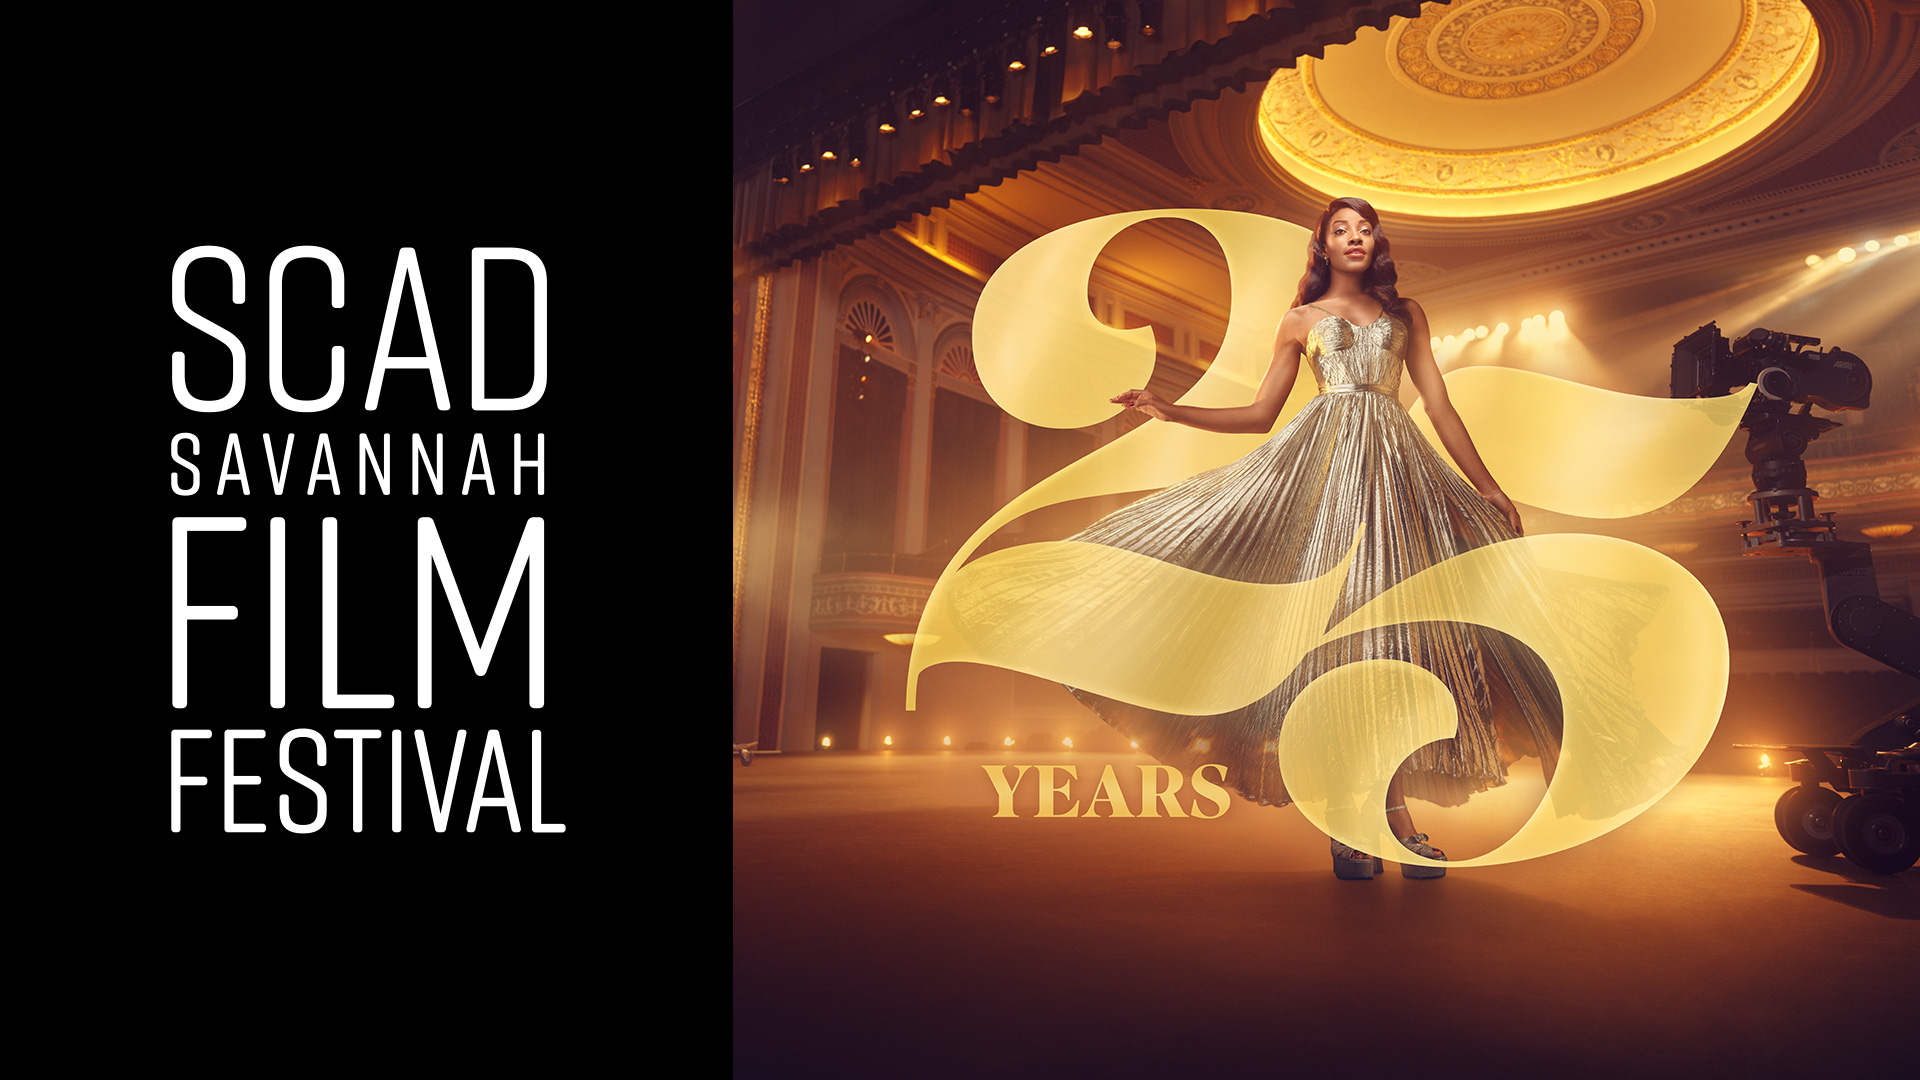 SCAD celebrates 25 years of the SCAD Savannah Film Festival with a